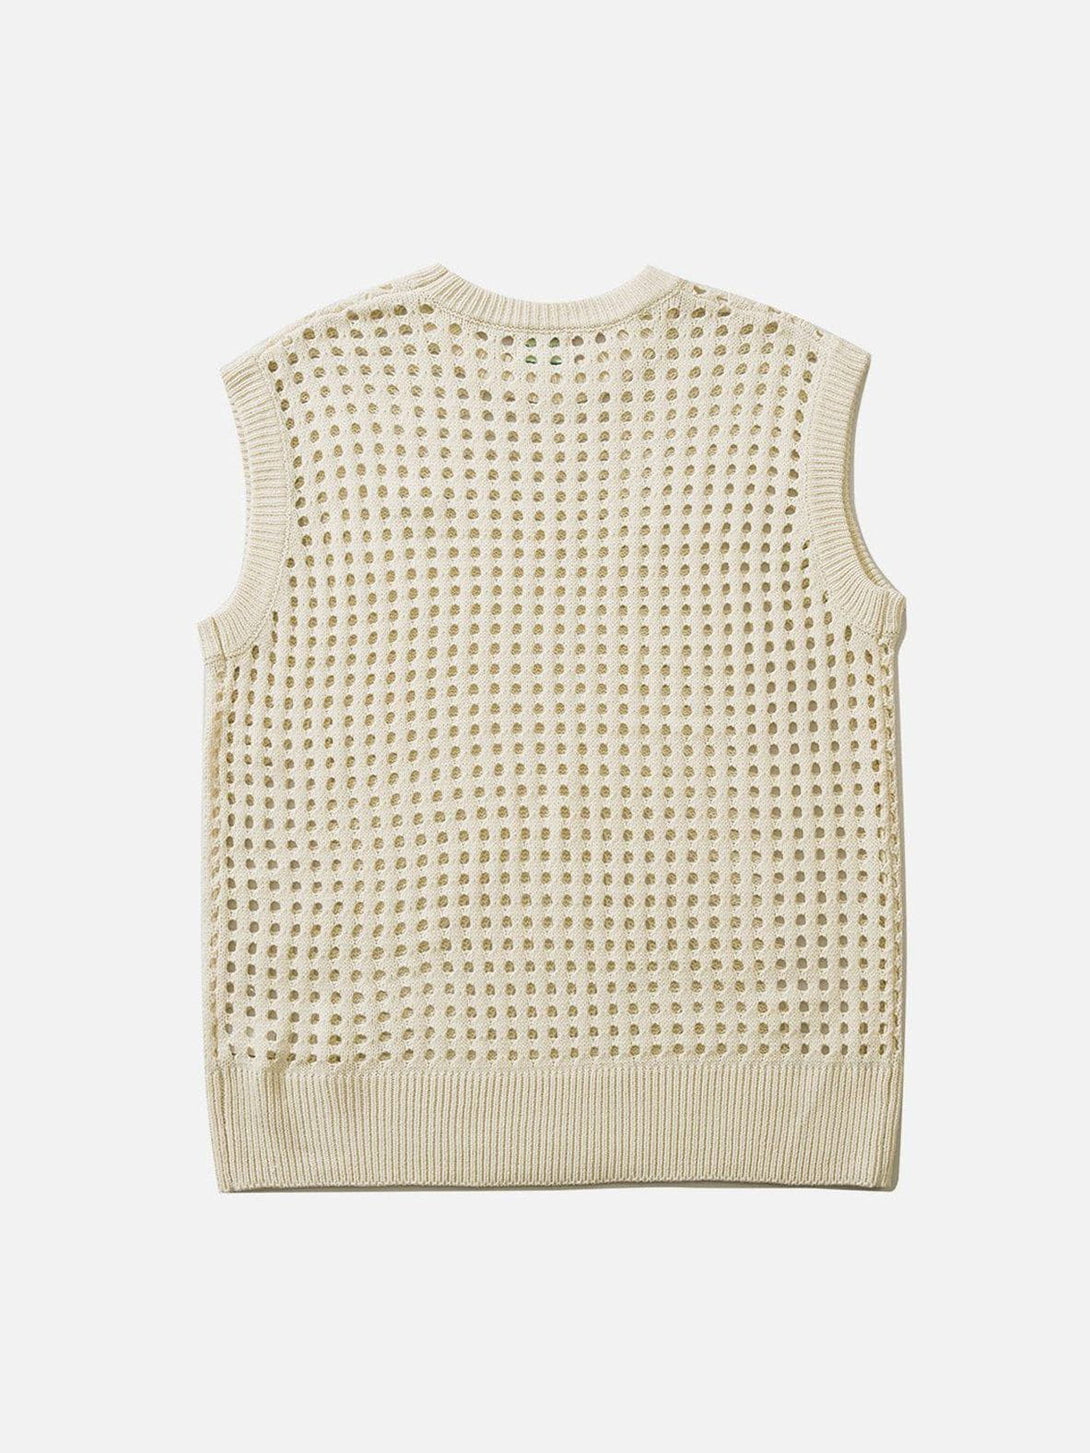 Majesda® - Knitted Cutout Sweater Vest outfit ideas streetwear fashion